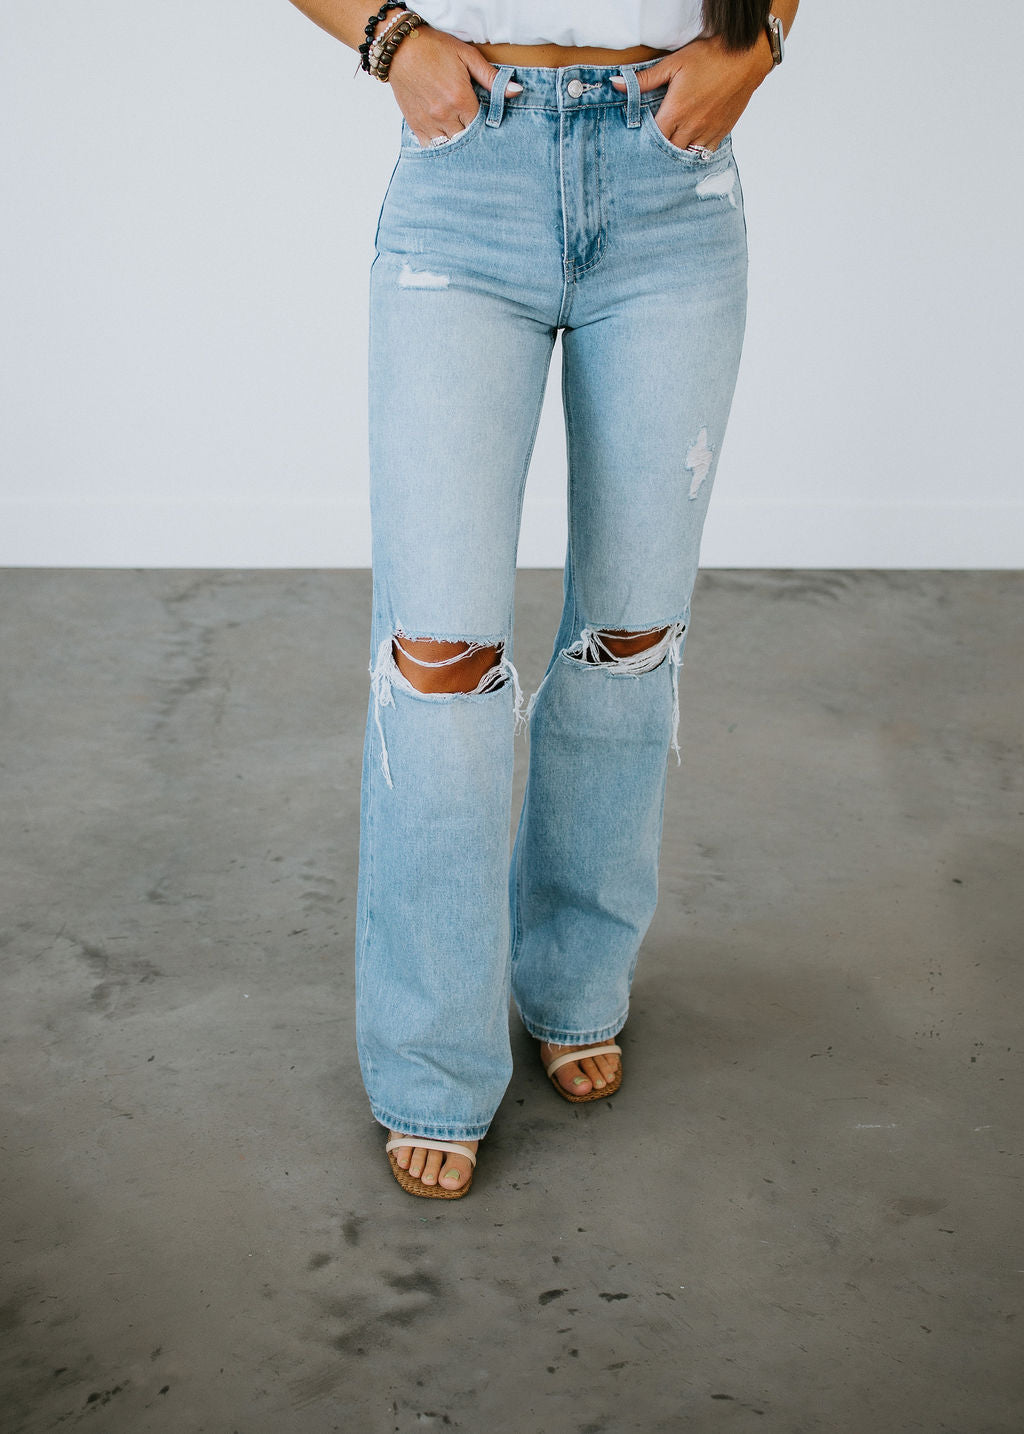 Women's High Rise Vintage Flare Jean